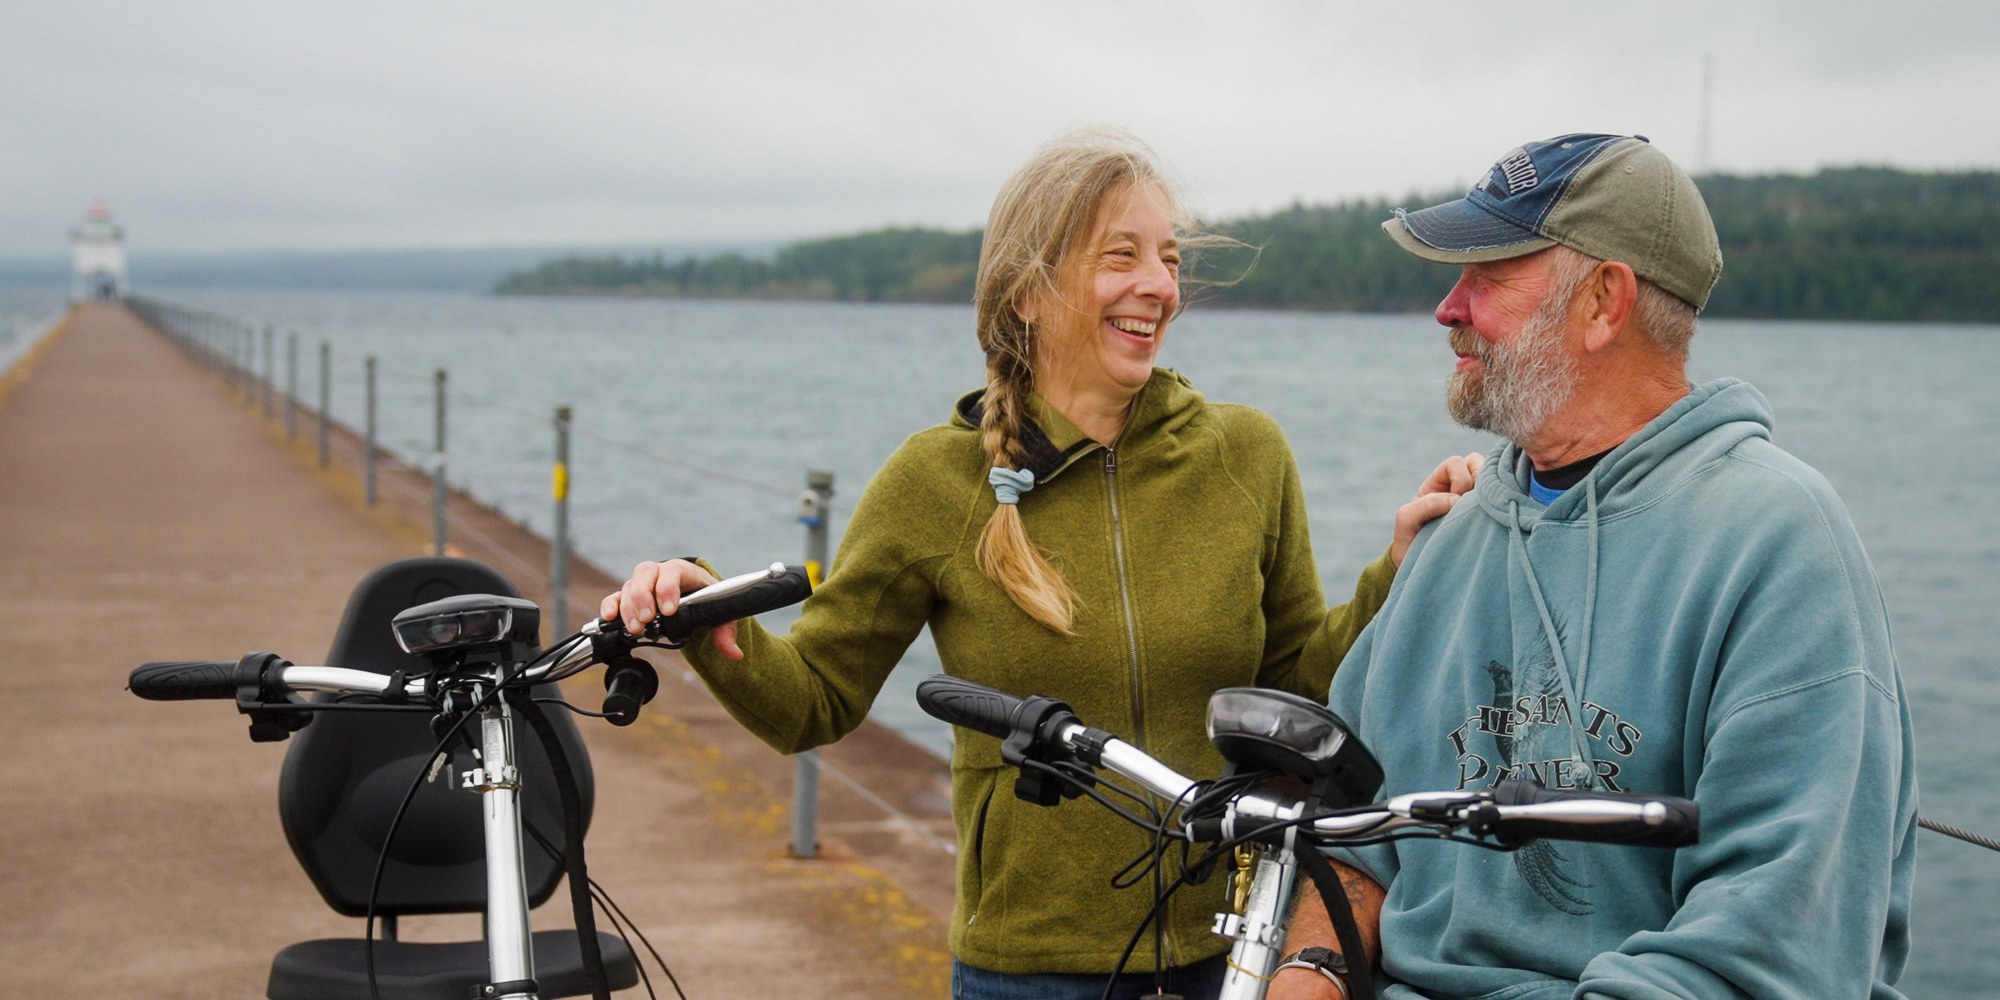 Couple smiling with their bikes along a pier and Lake Superior in background. 